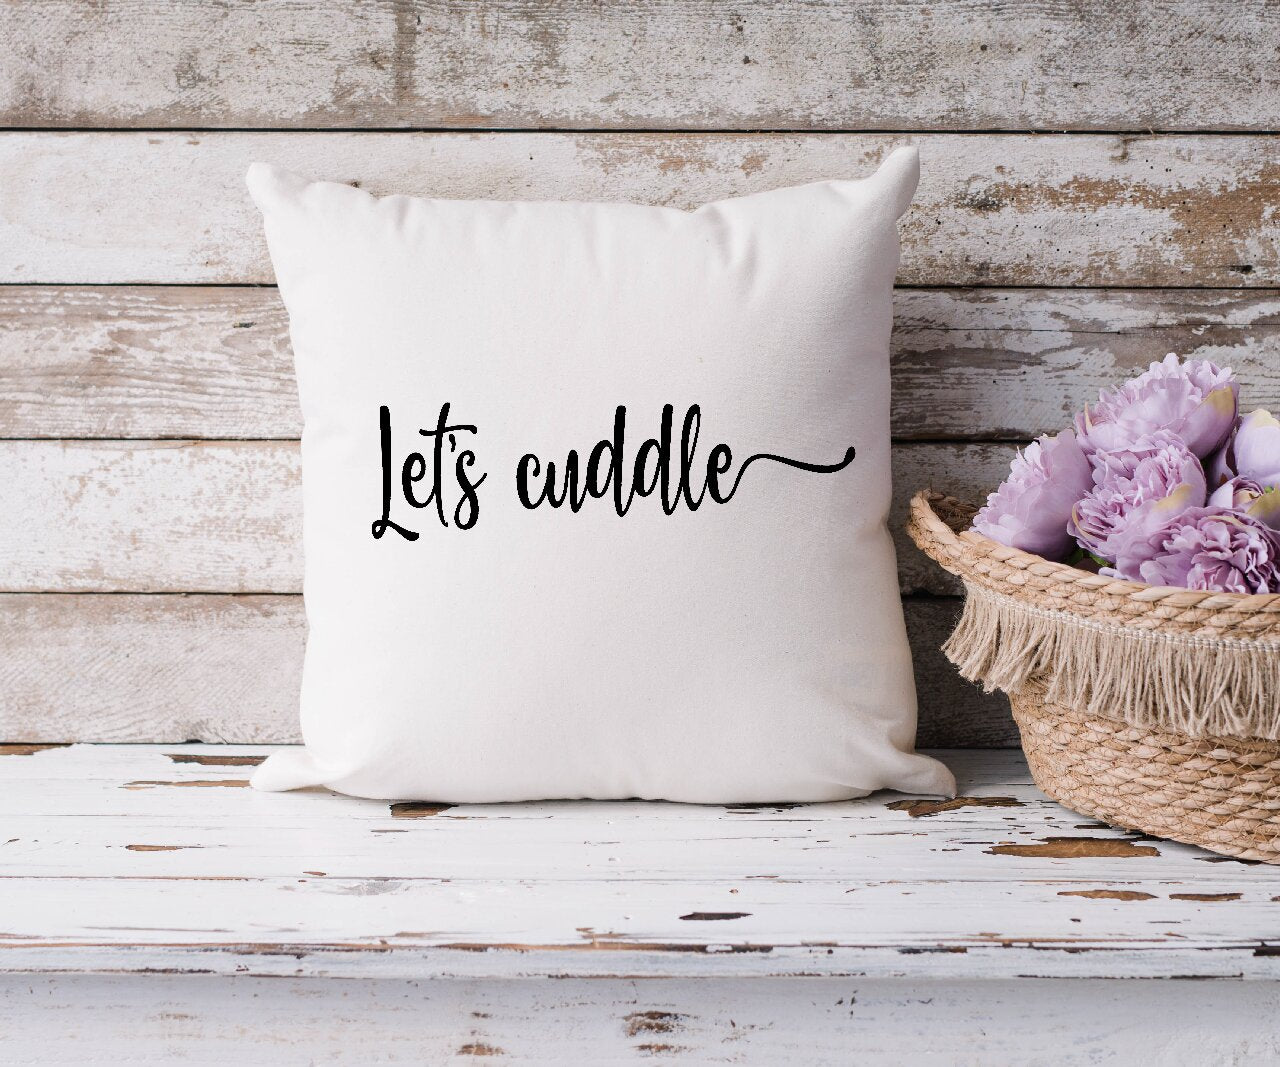 Let's Cuddle - Cushion Cover